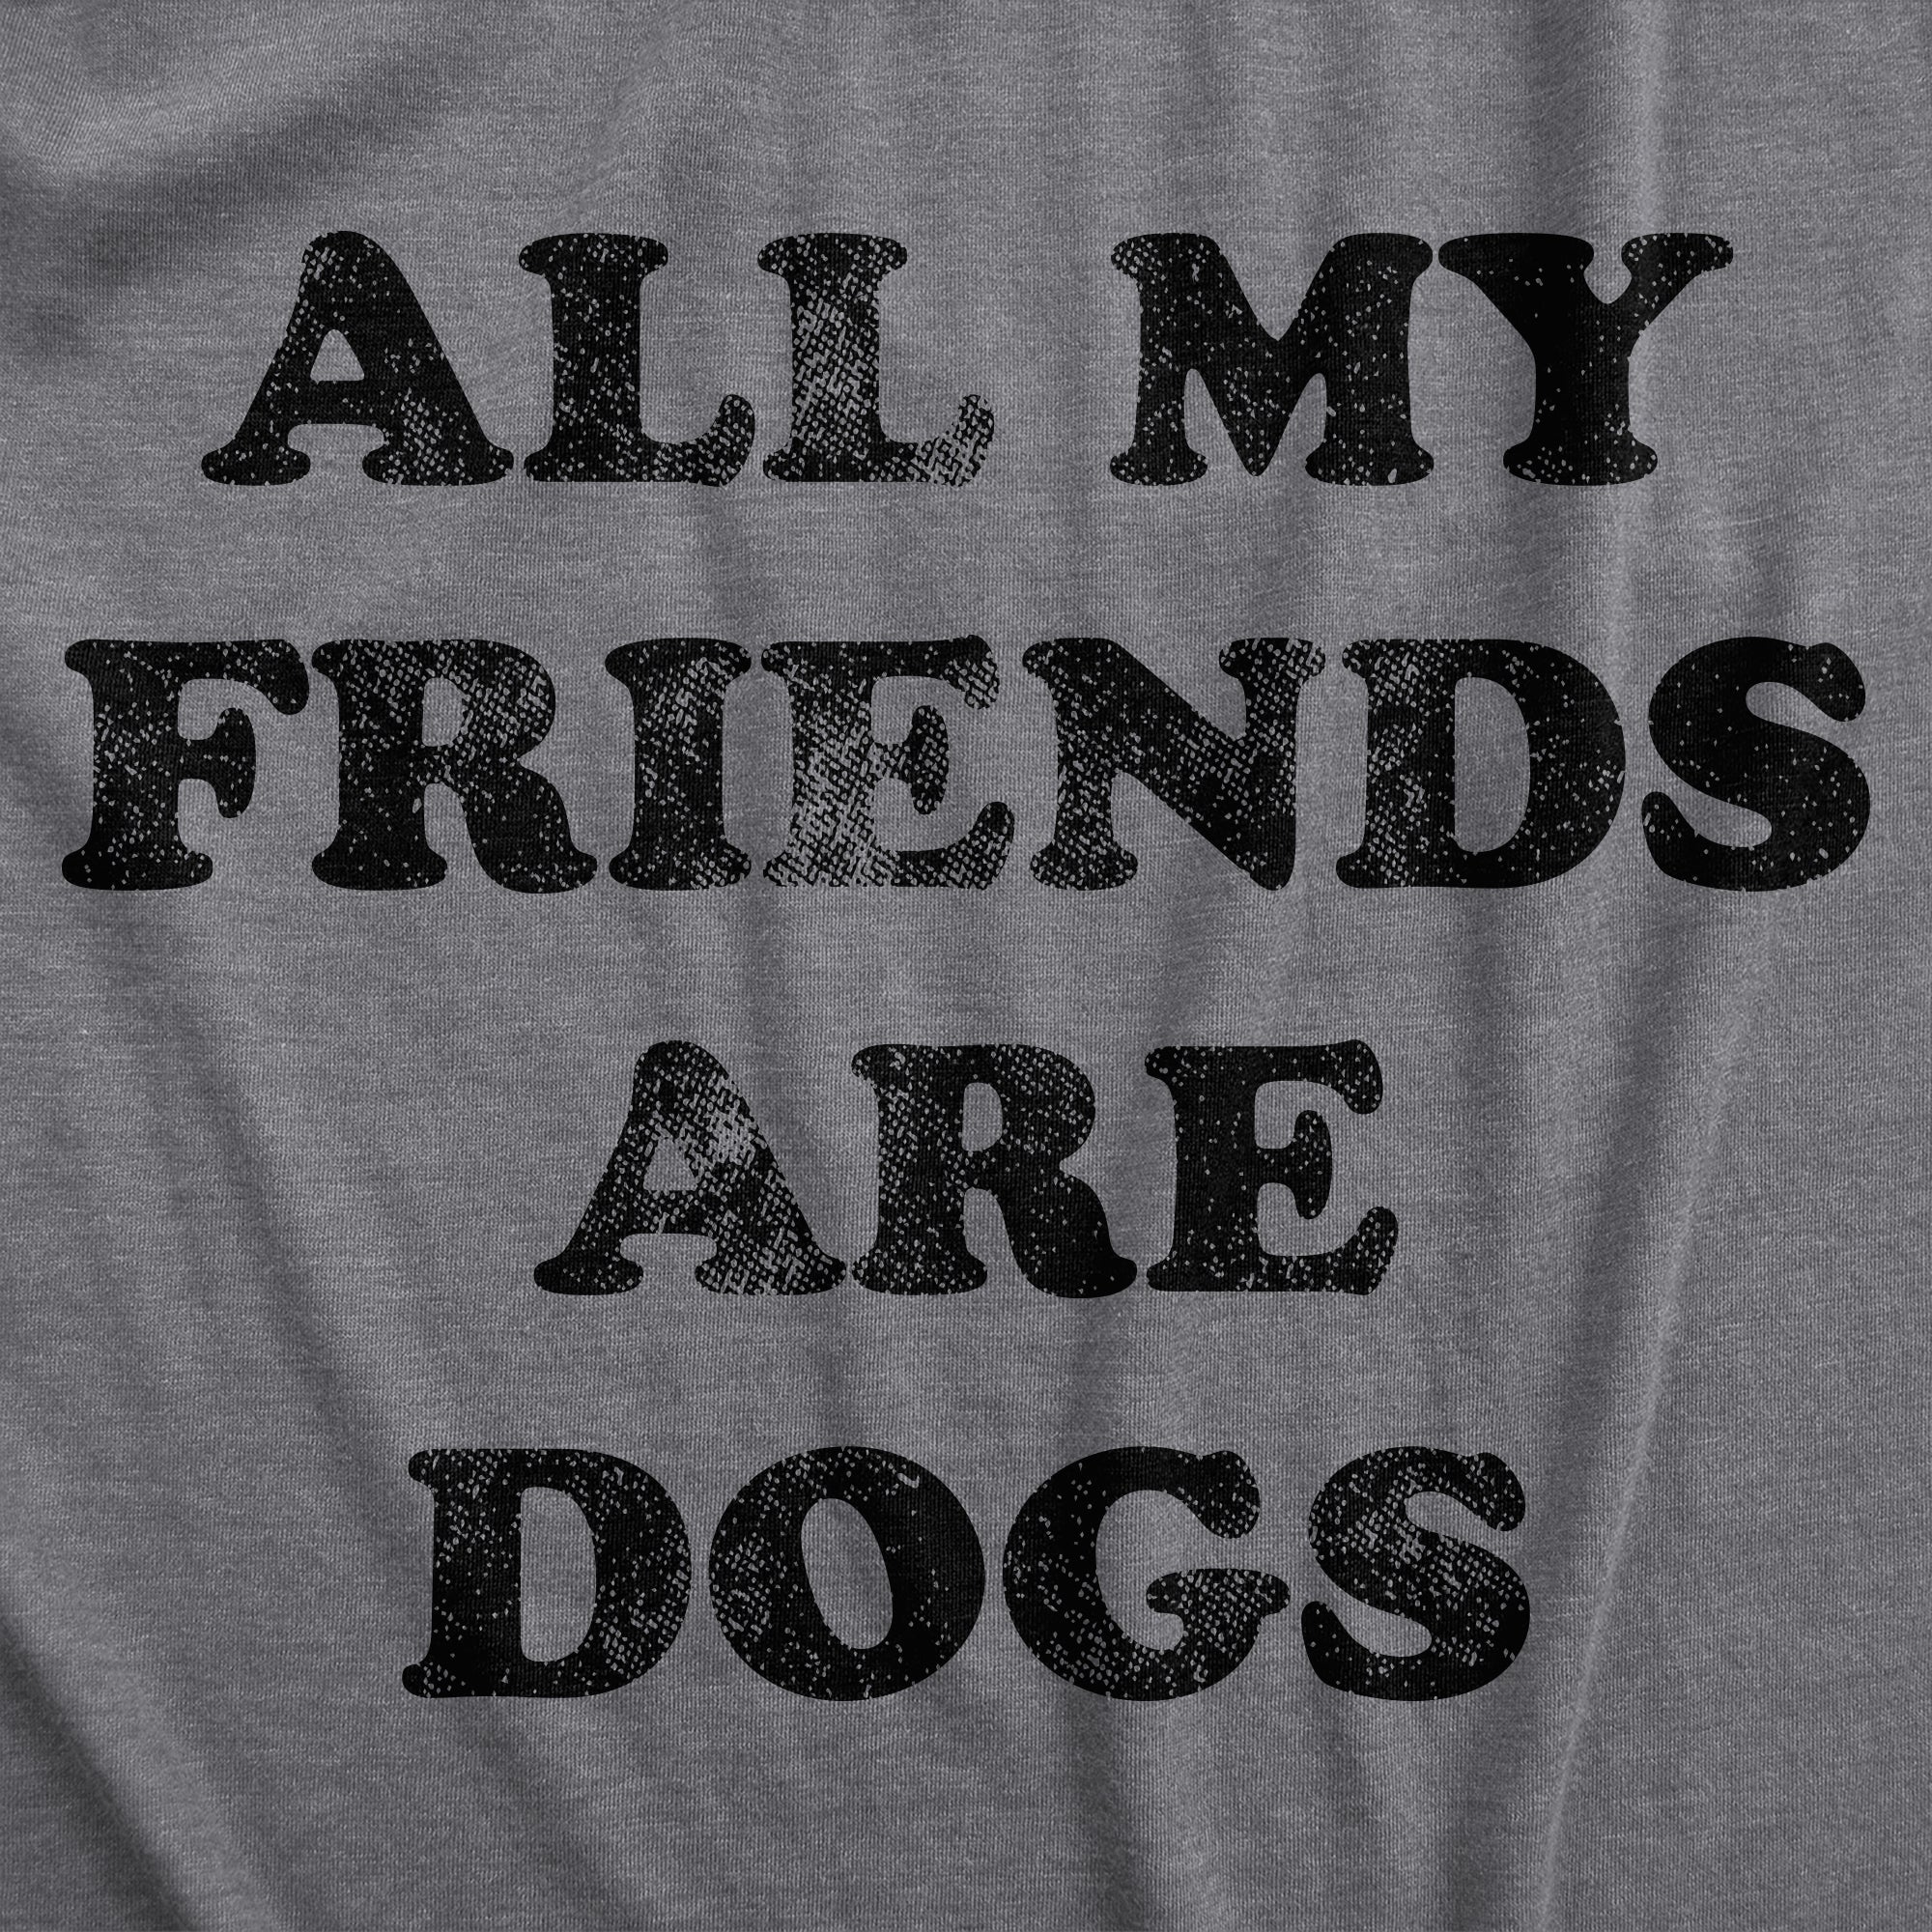 Funny Dark Heather Grey - FRIENDSDOGS All My Friends Are Dogs Mens T Shirt Nerdy Dog Introvert Tee